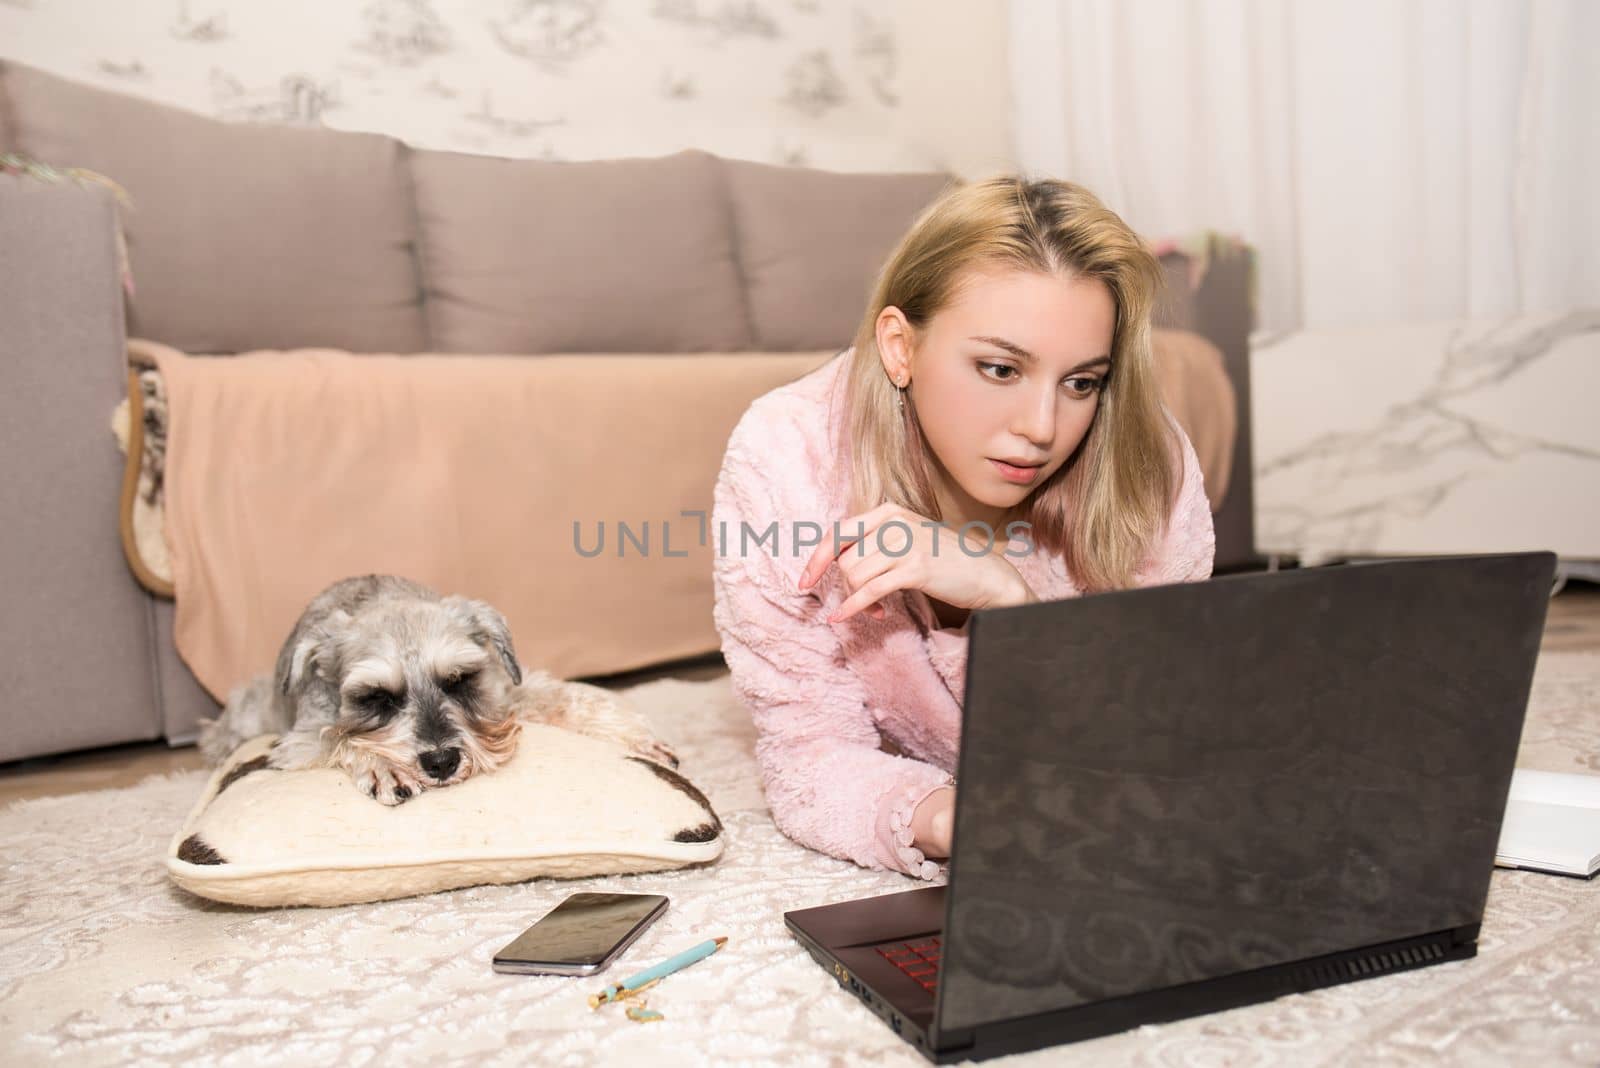 Young blond lady is working on a laptop, a gray dog is lying on the carpet next to her.